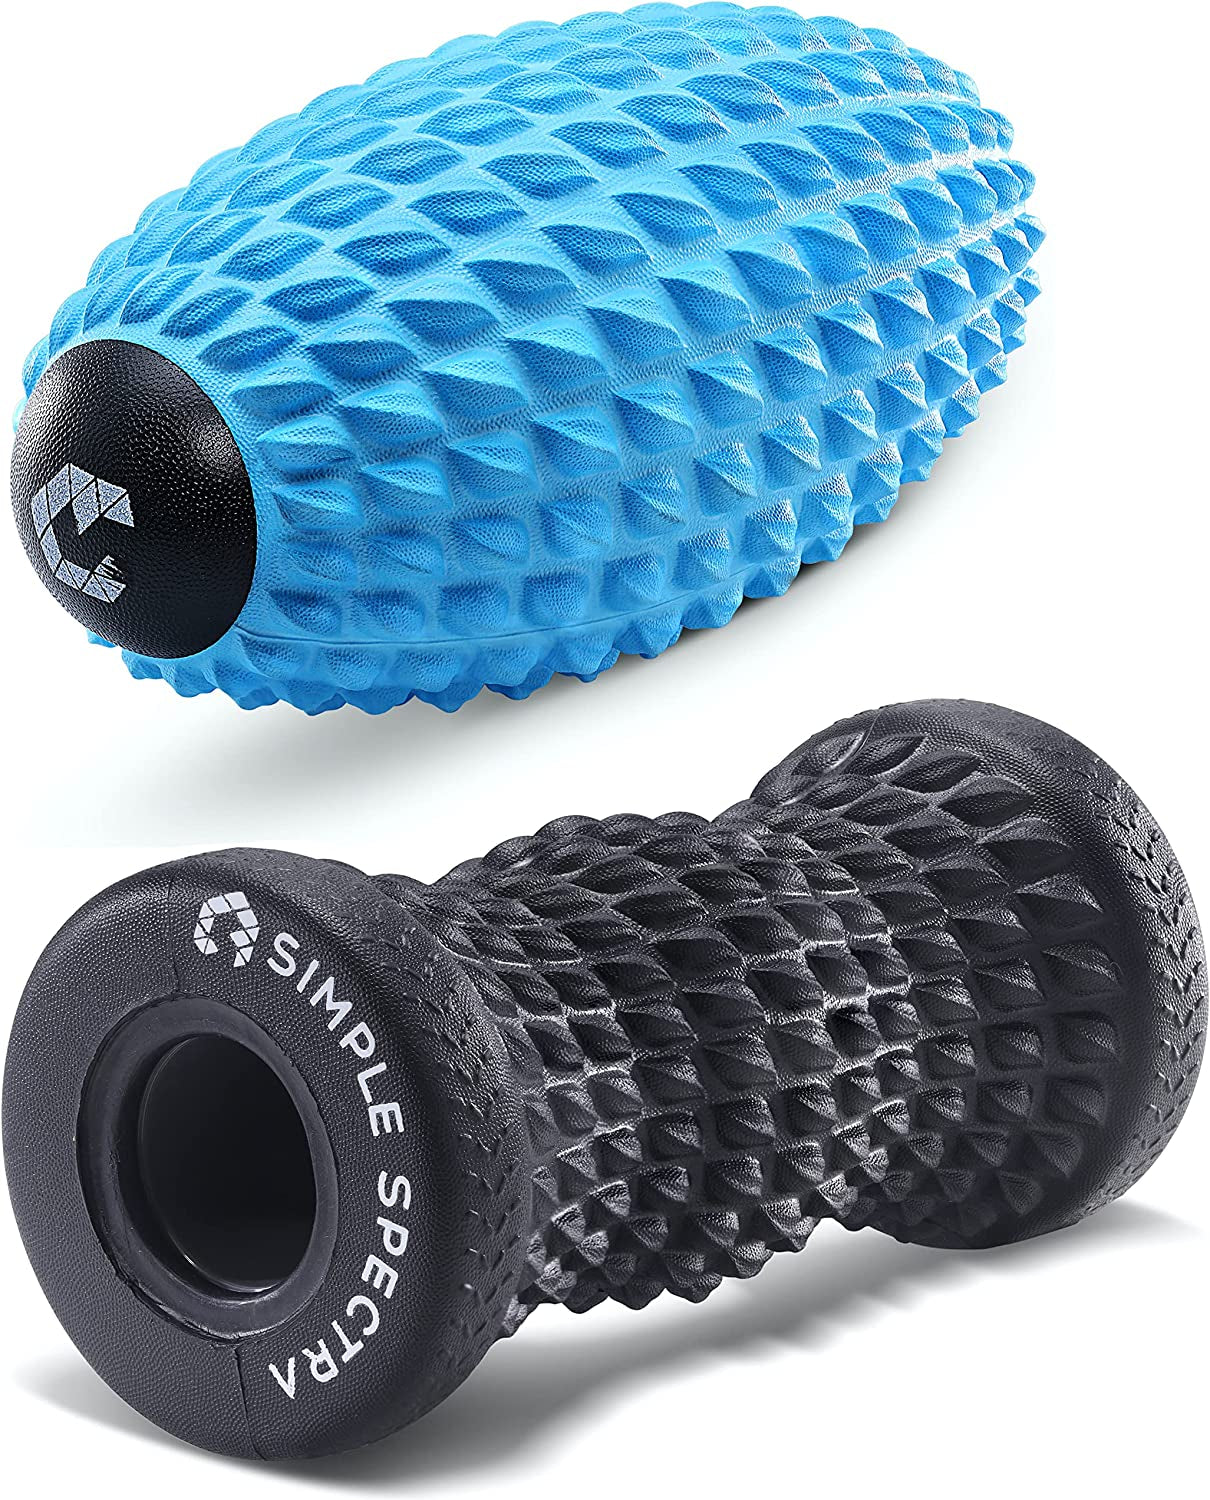 Foot Massager Roller & Spiky Ball Therapy Set - Massage Tool for Muscle Pain Relief from Plantar Fasciitis | Best for Trigger Point Release, Acupressure Reflexology with Ebook Guide